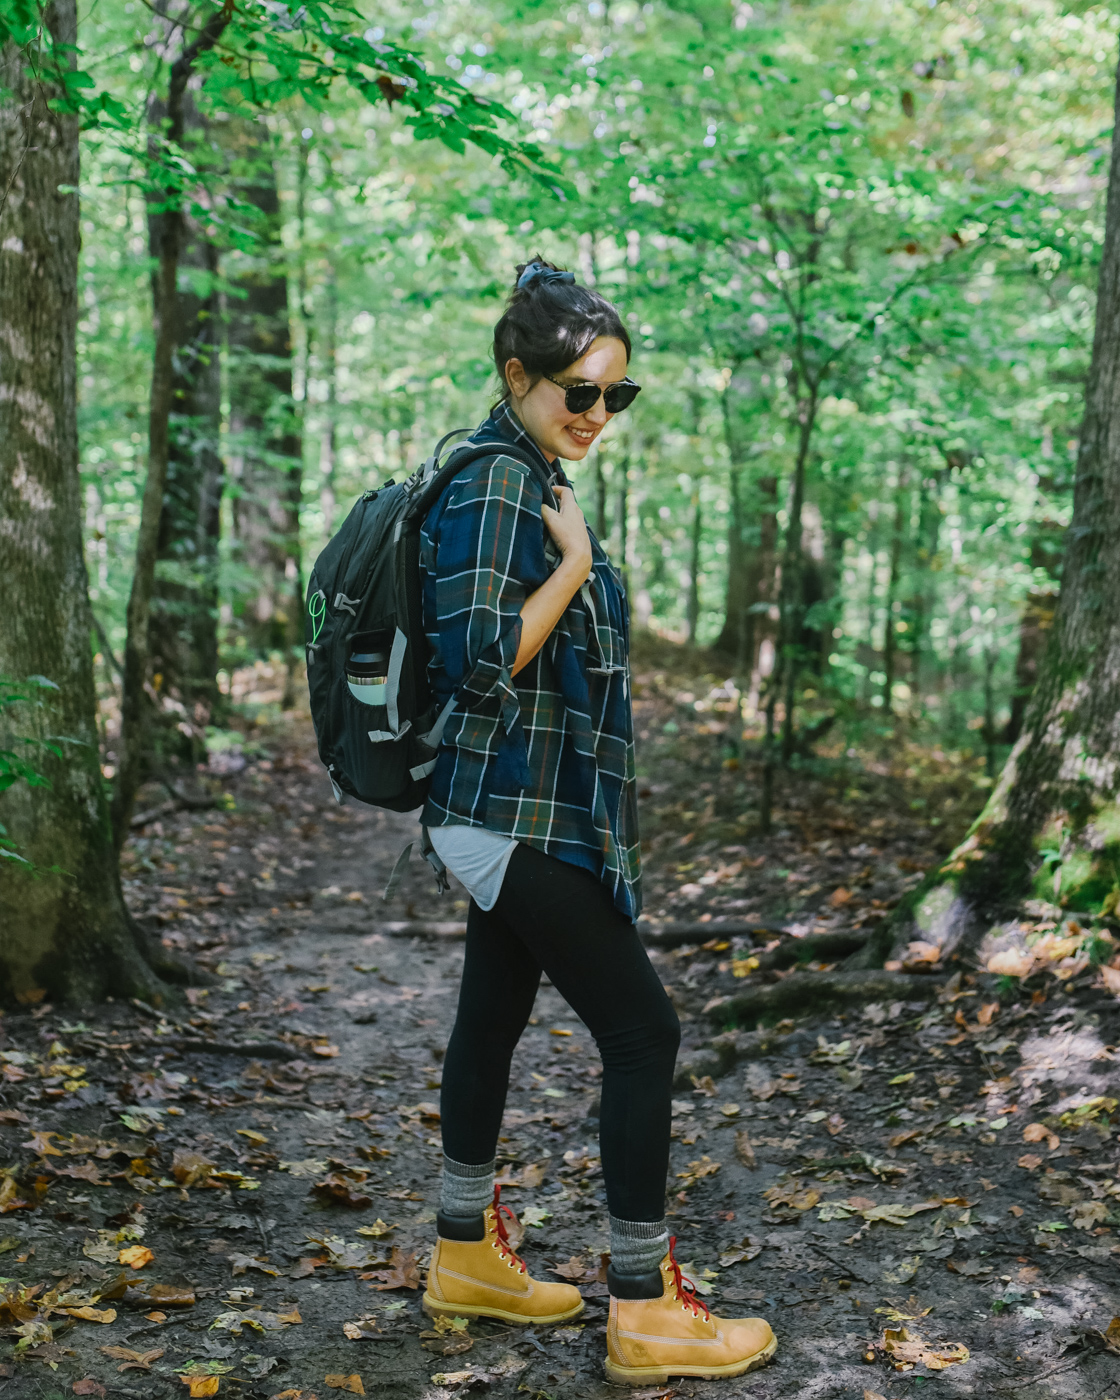 Hiking Outfit Fall  Explore the Outdoors in Style